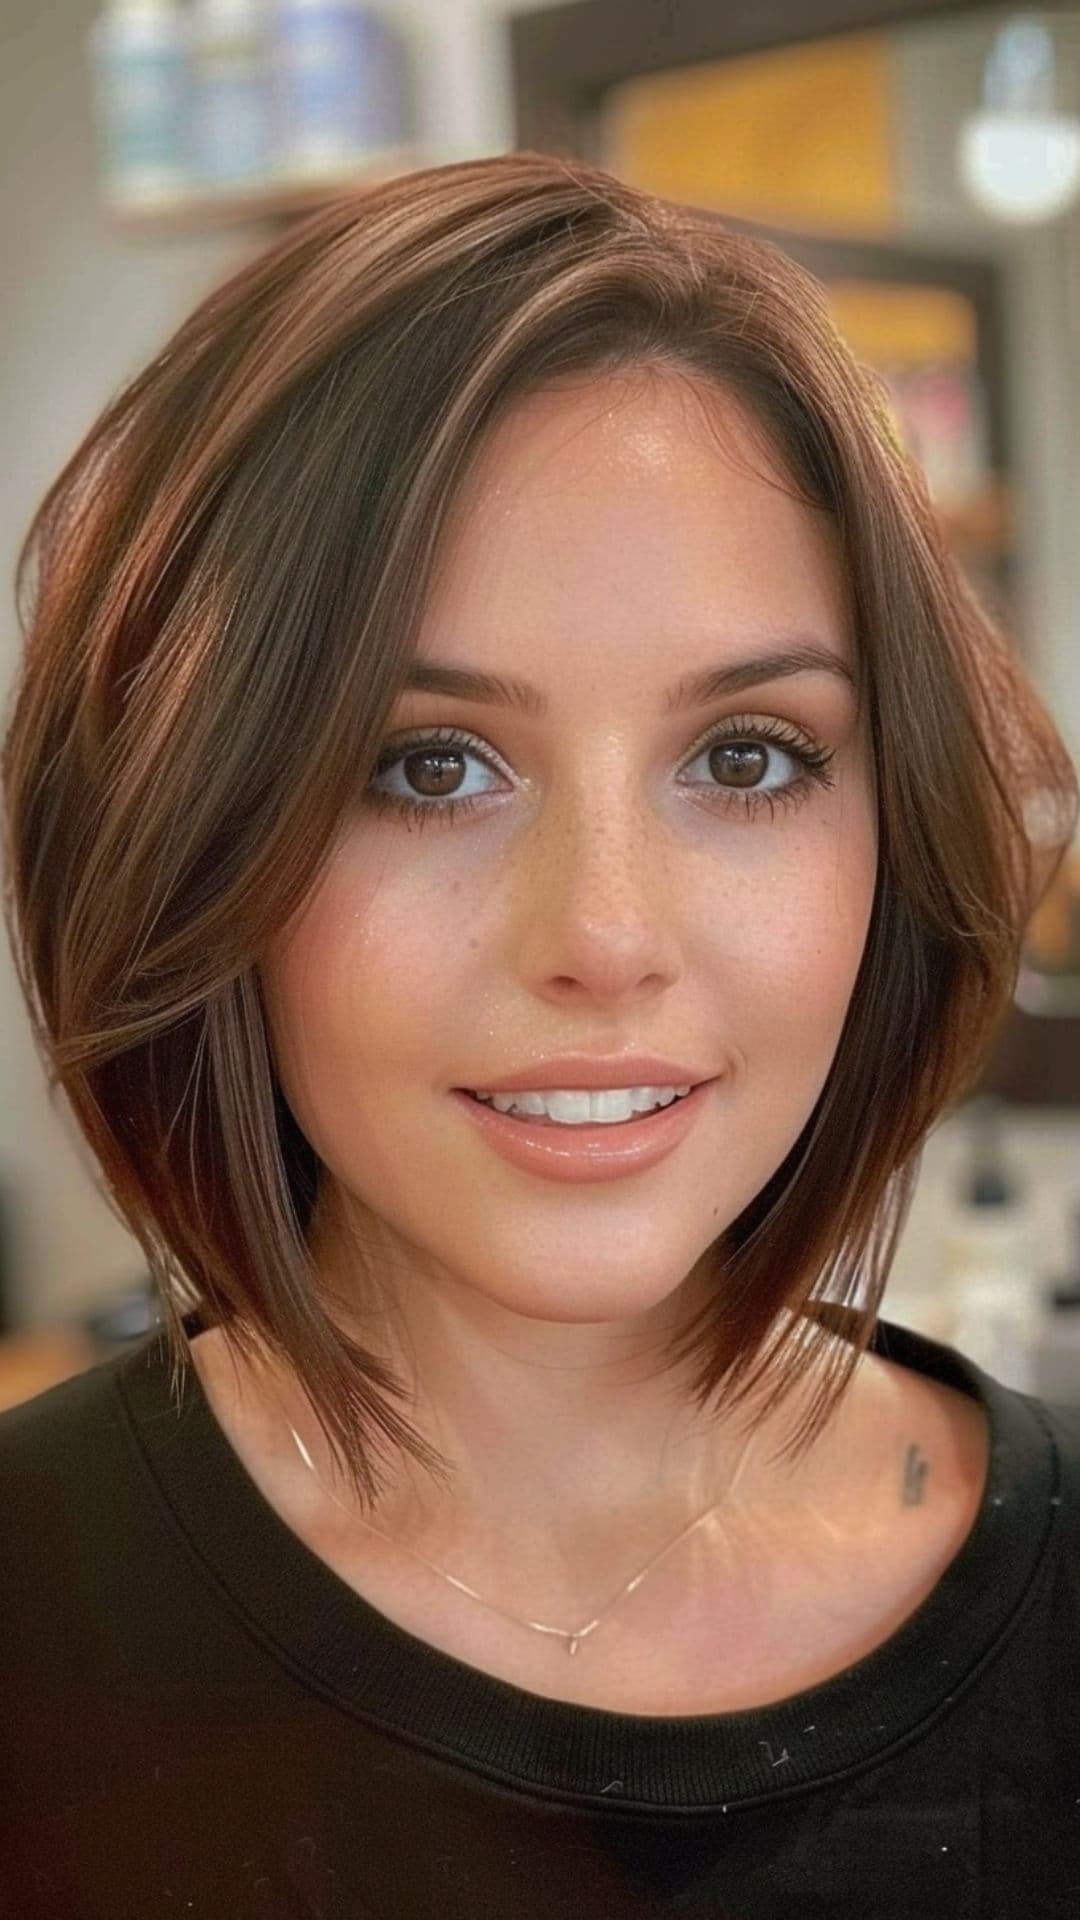 A woman modelling a bob with deep side part haircut.